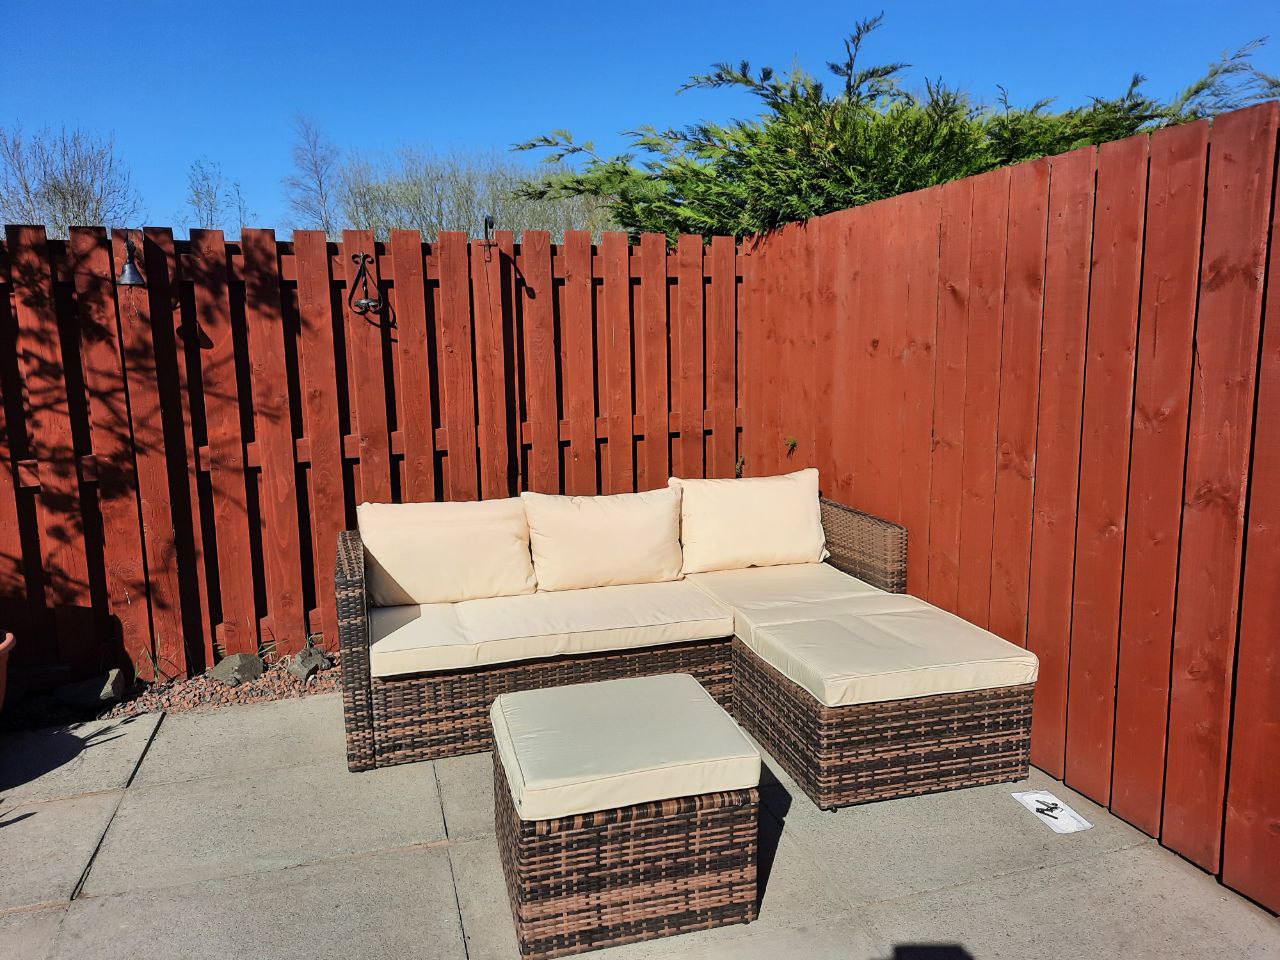 This garden sofa can be assembled in two different ways, best fitting your available garden space. Our customer asked us to place the sofa along her garden fence with the long lounge section on the right side. Garden furniture assembly by Flat Pack Happy.